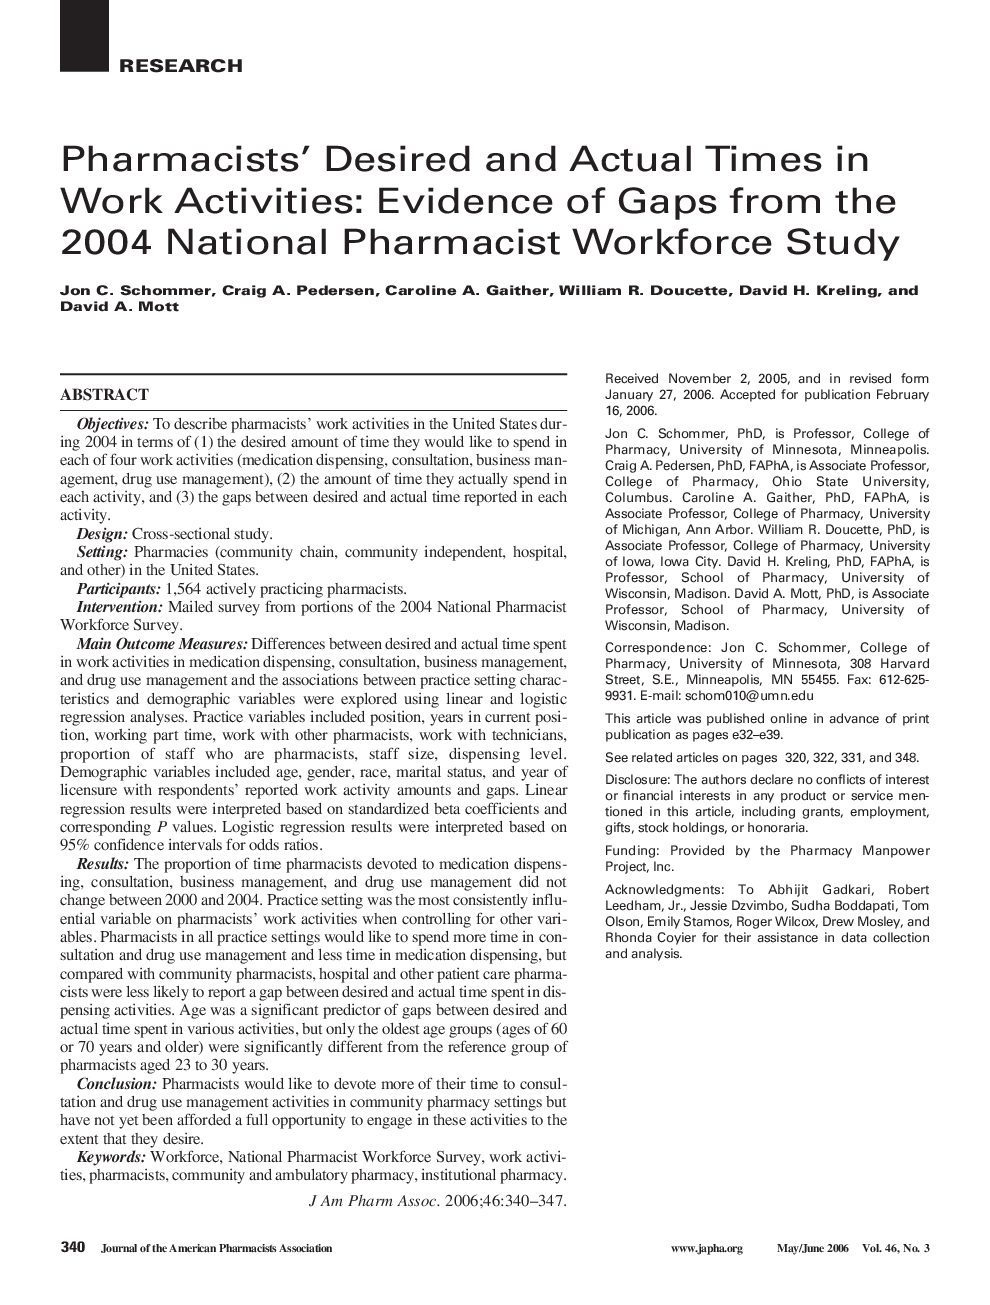 Pharmacists' Desired and Actual Times in Work Activities: Evidence of Gaps from the 2004 National Pharmacist Workforce Study